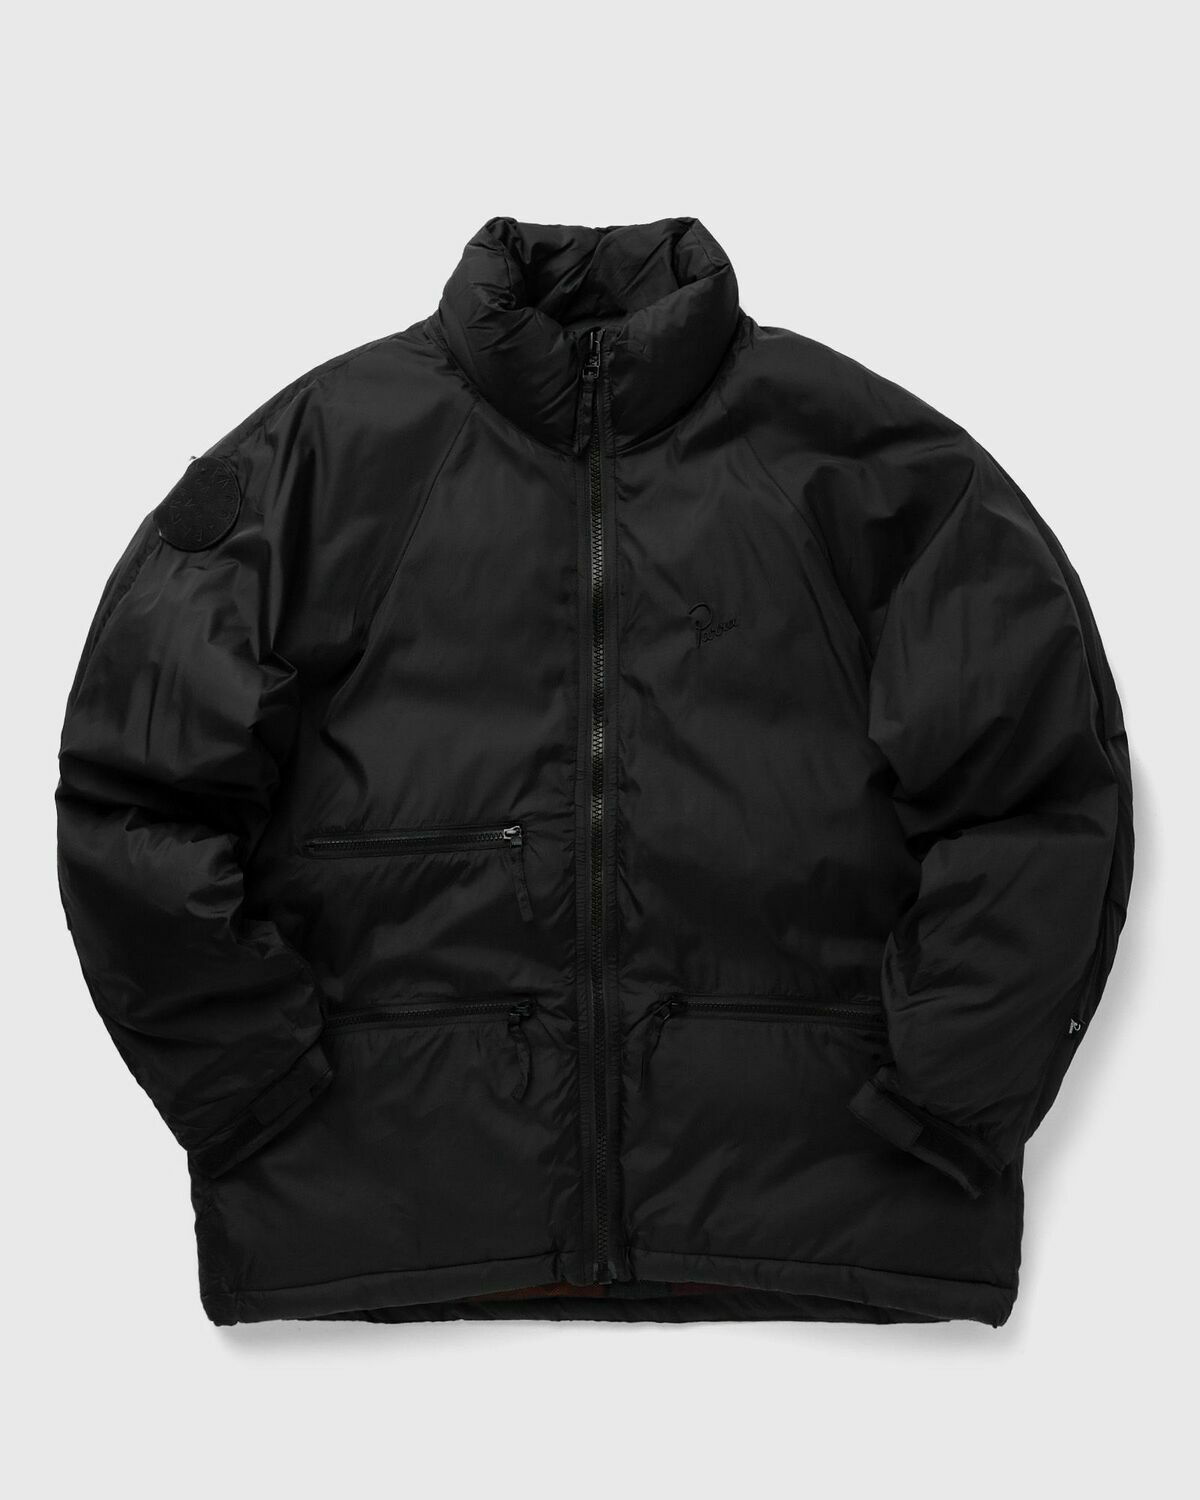 By Parra Canyons All Over Jacket Black - Mens - Down & Puffer Jackets ...